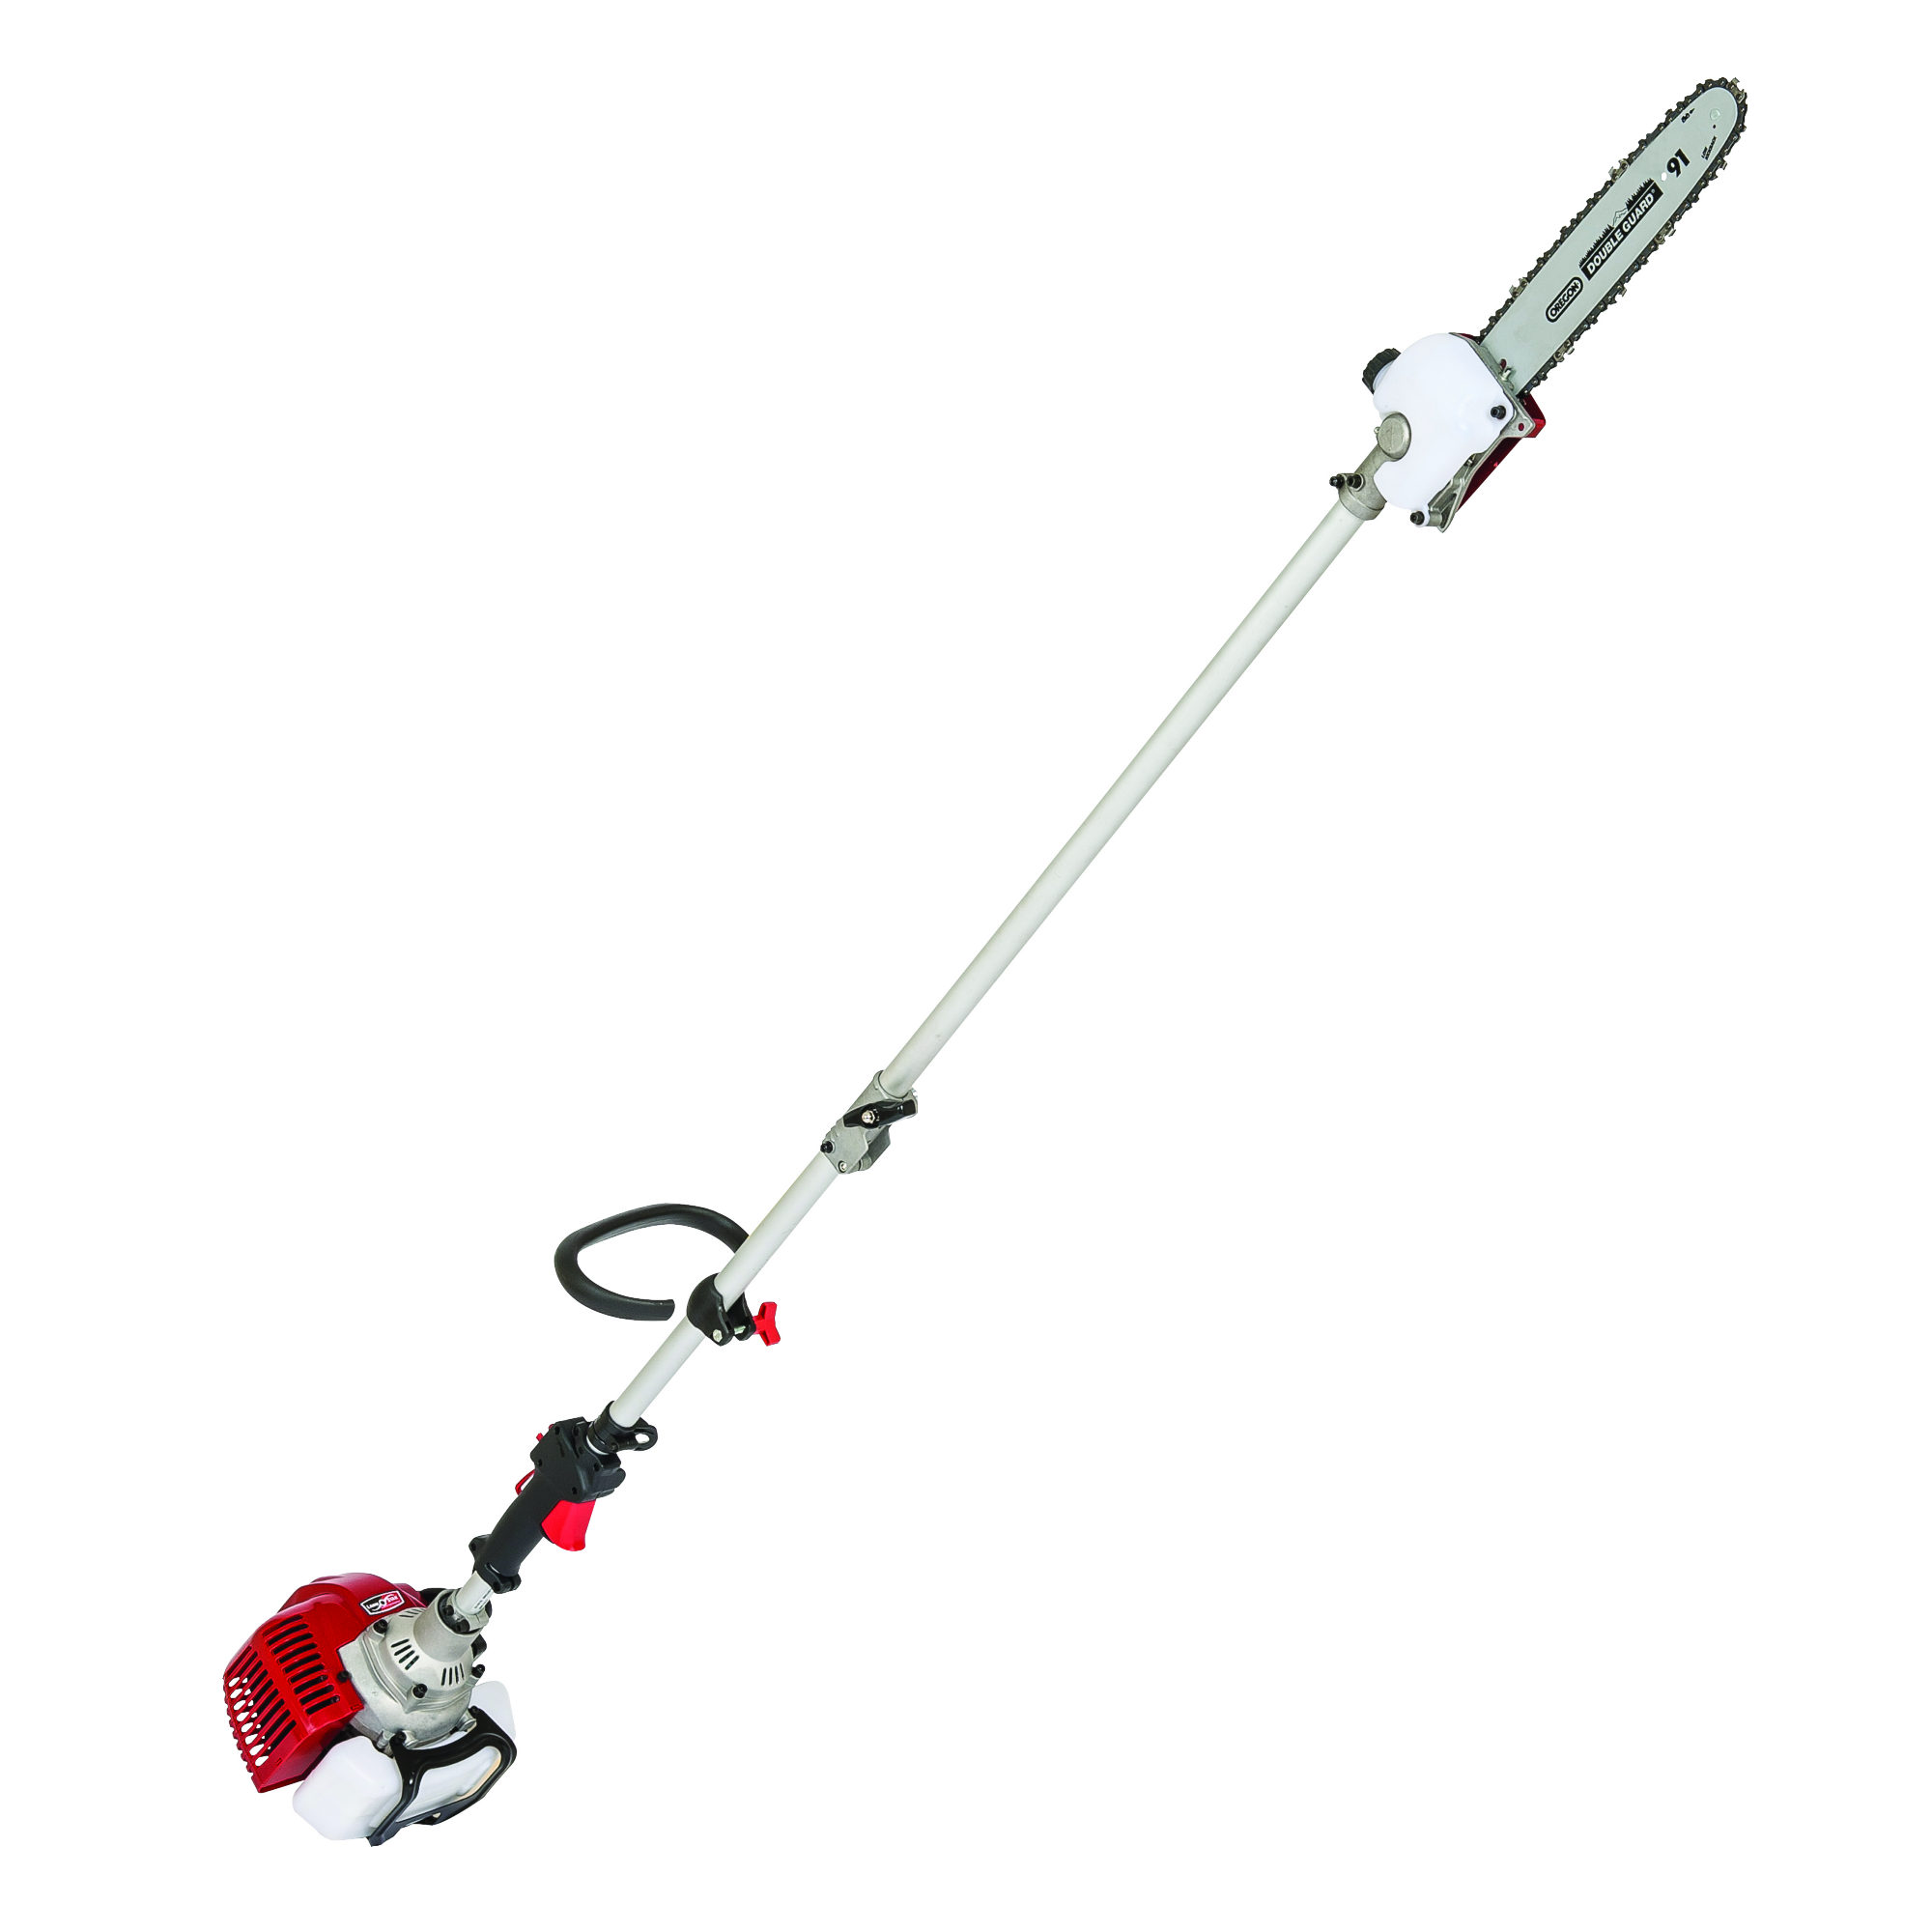 LS 3325 PPS Petrol Pole-Chainsaw